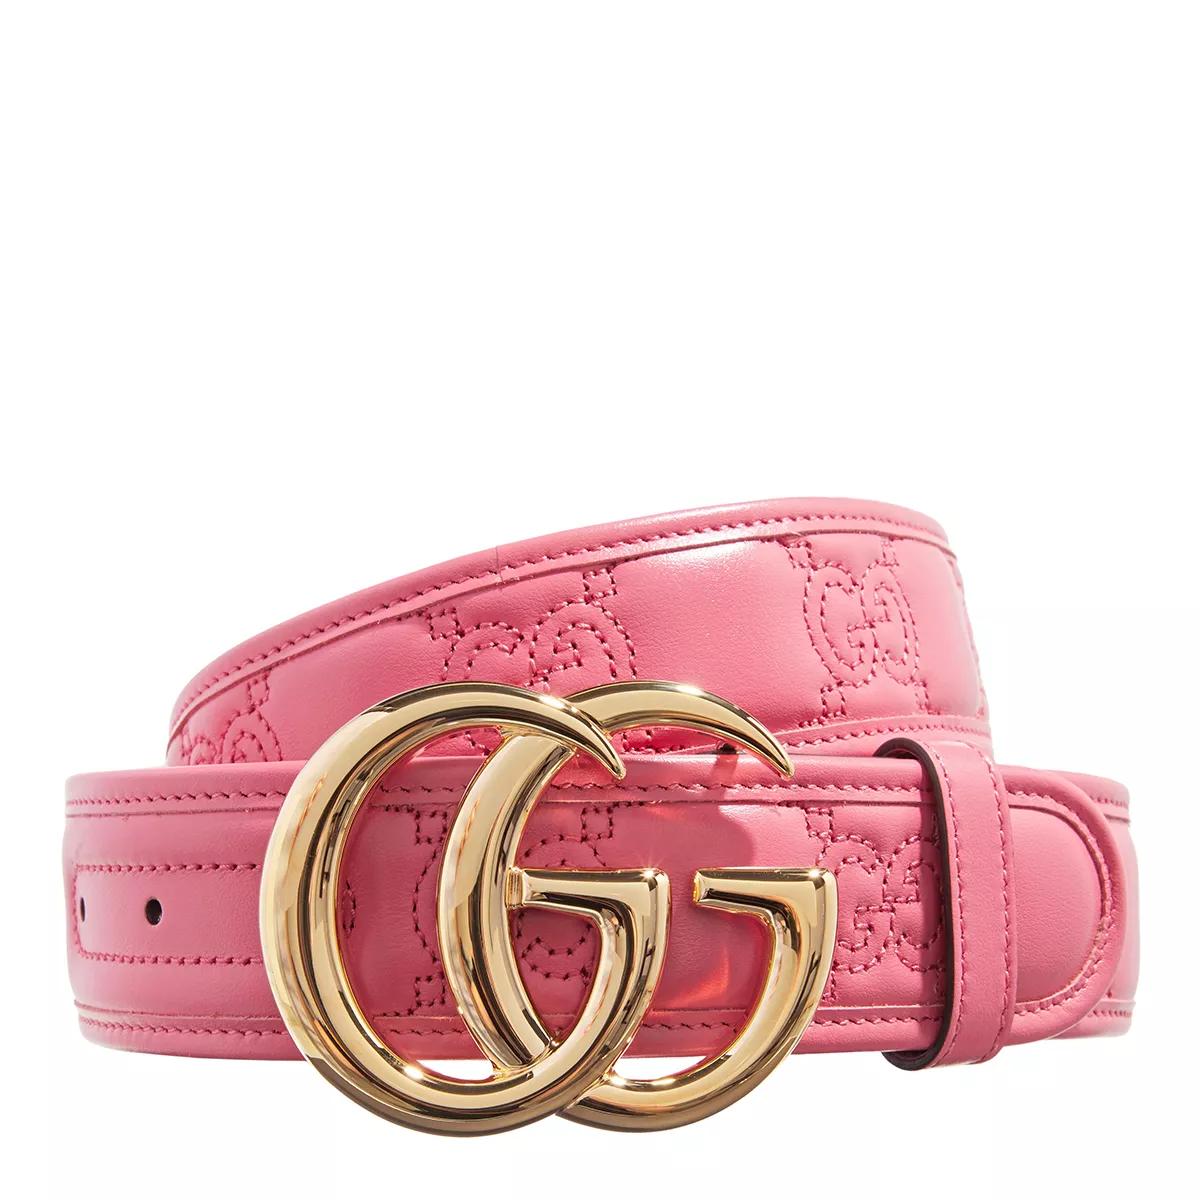 Gucci Marmont Quilted Leather Belt Rhodamine Pink | Leather Belt ...